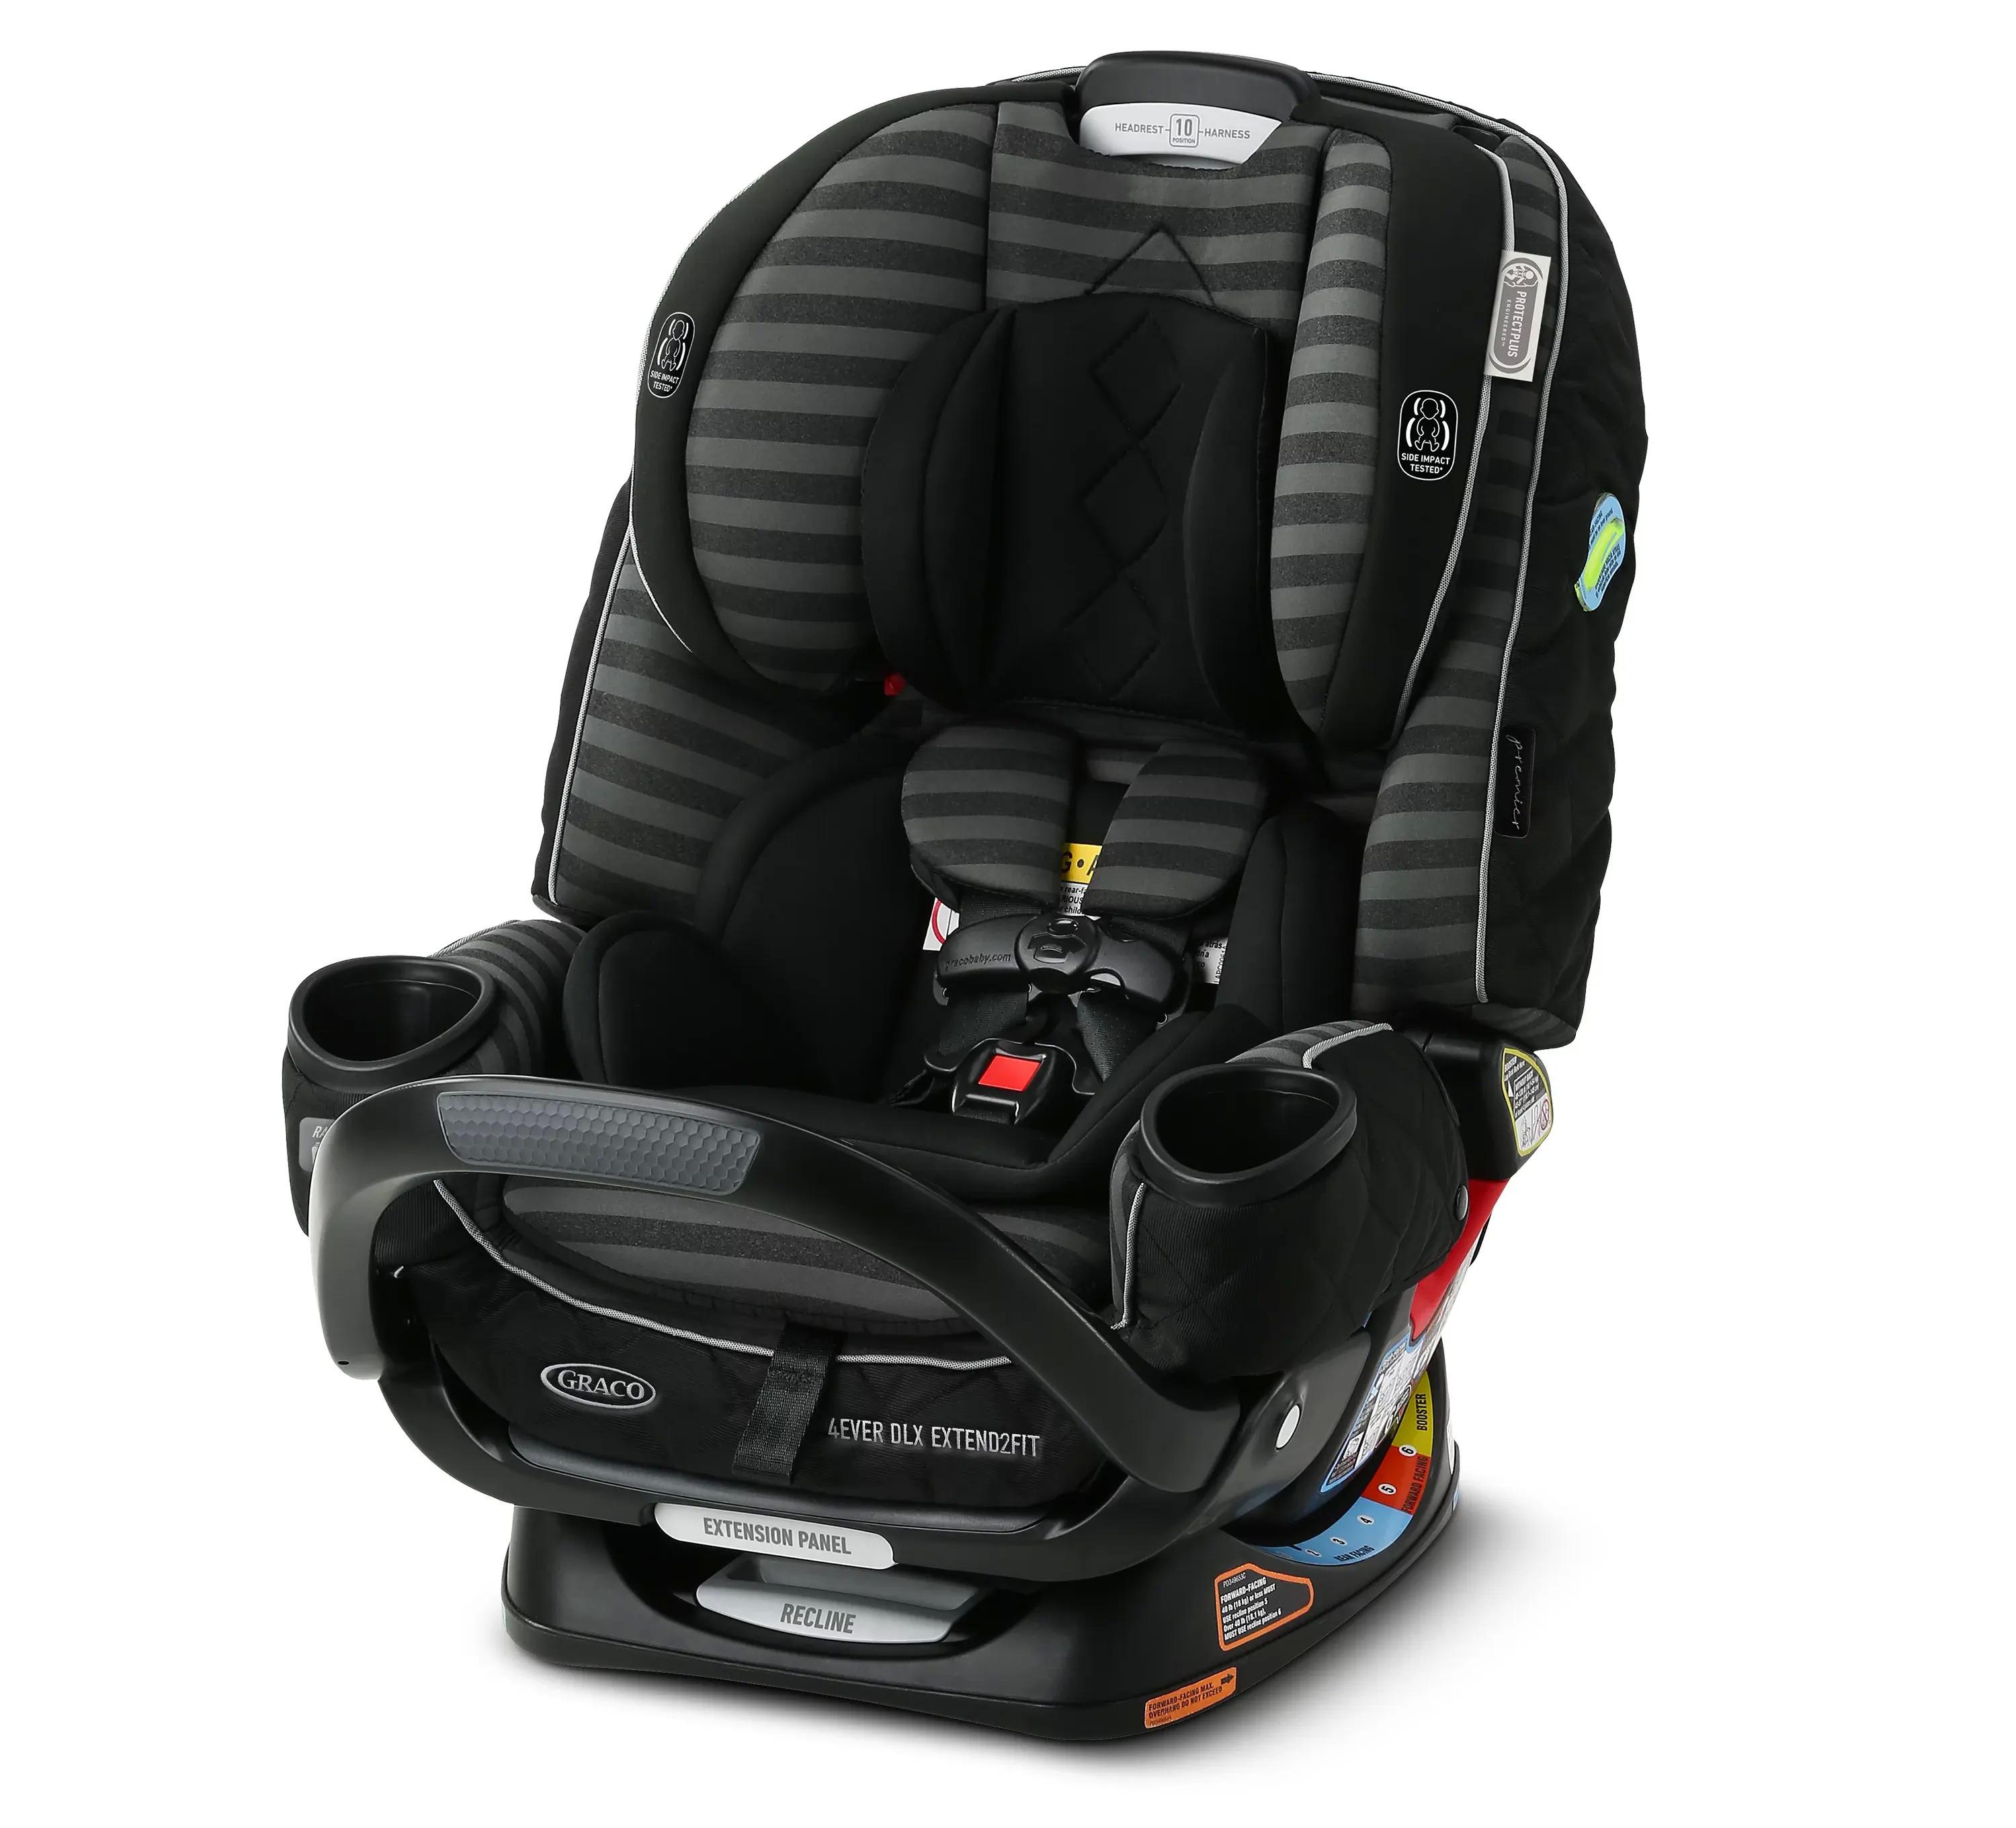 Graco Premier 4Ever DLX Extend2Fit 4-in-1 Car Seat for $205.79 Shipped